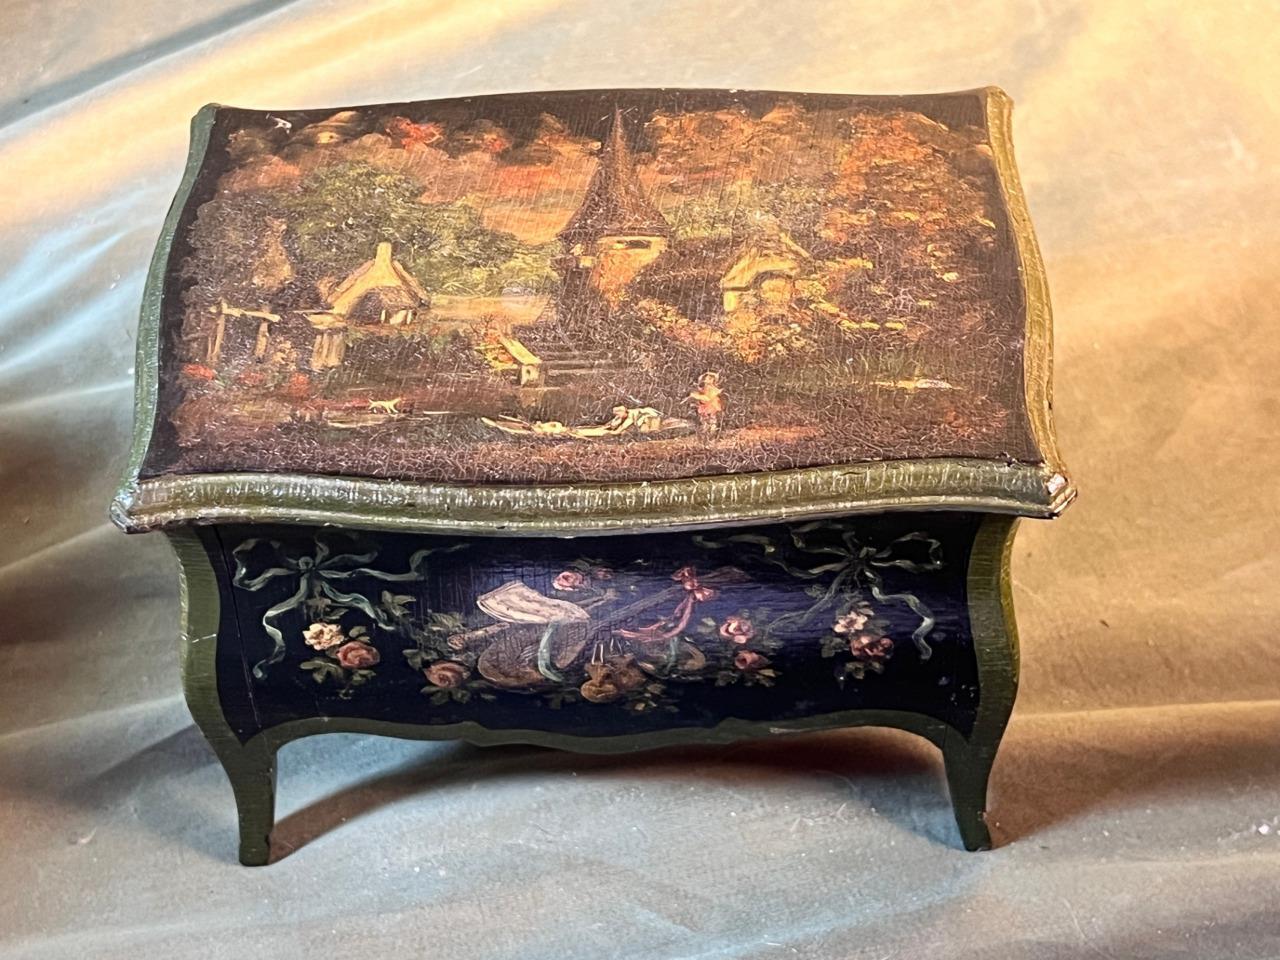 Old Miniature Chest Furniture Jewelry Chest Box Oil Painting Landscape & Flowers